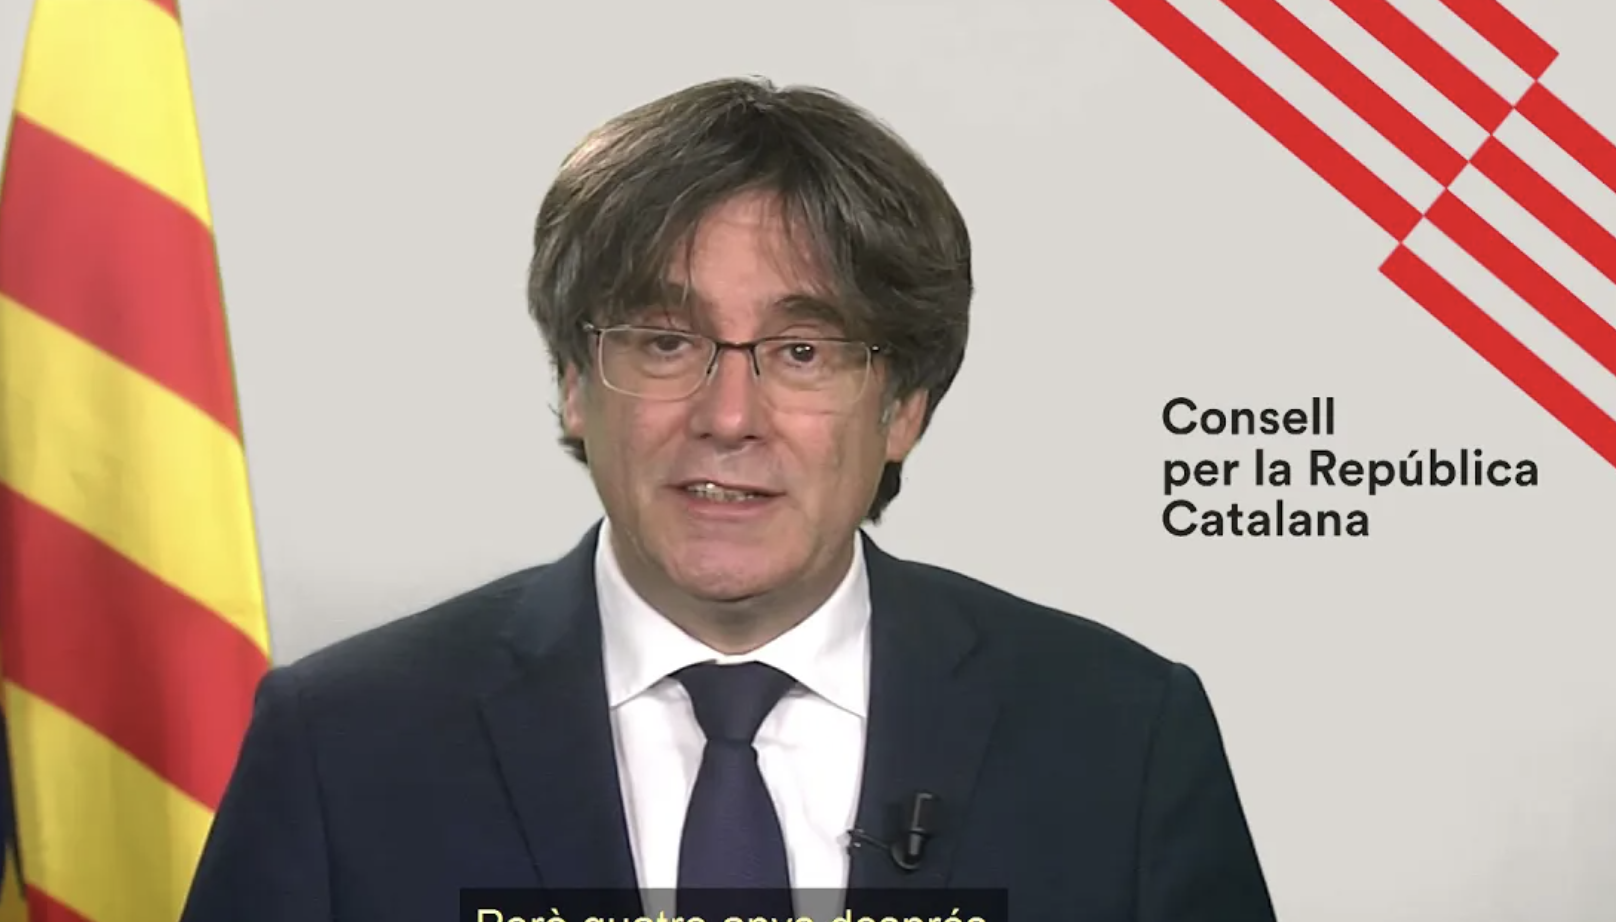 Puigdemont: "We've shown that there is a path and forms of victory in our hands"